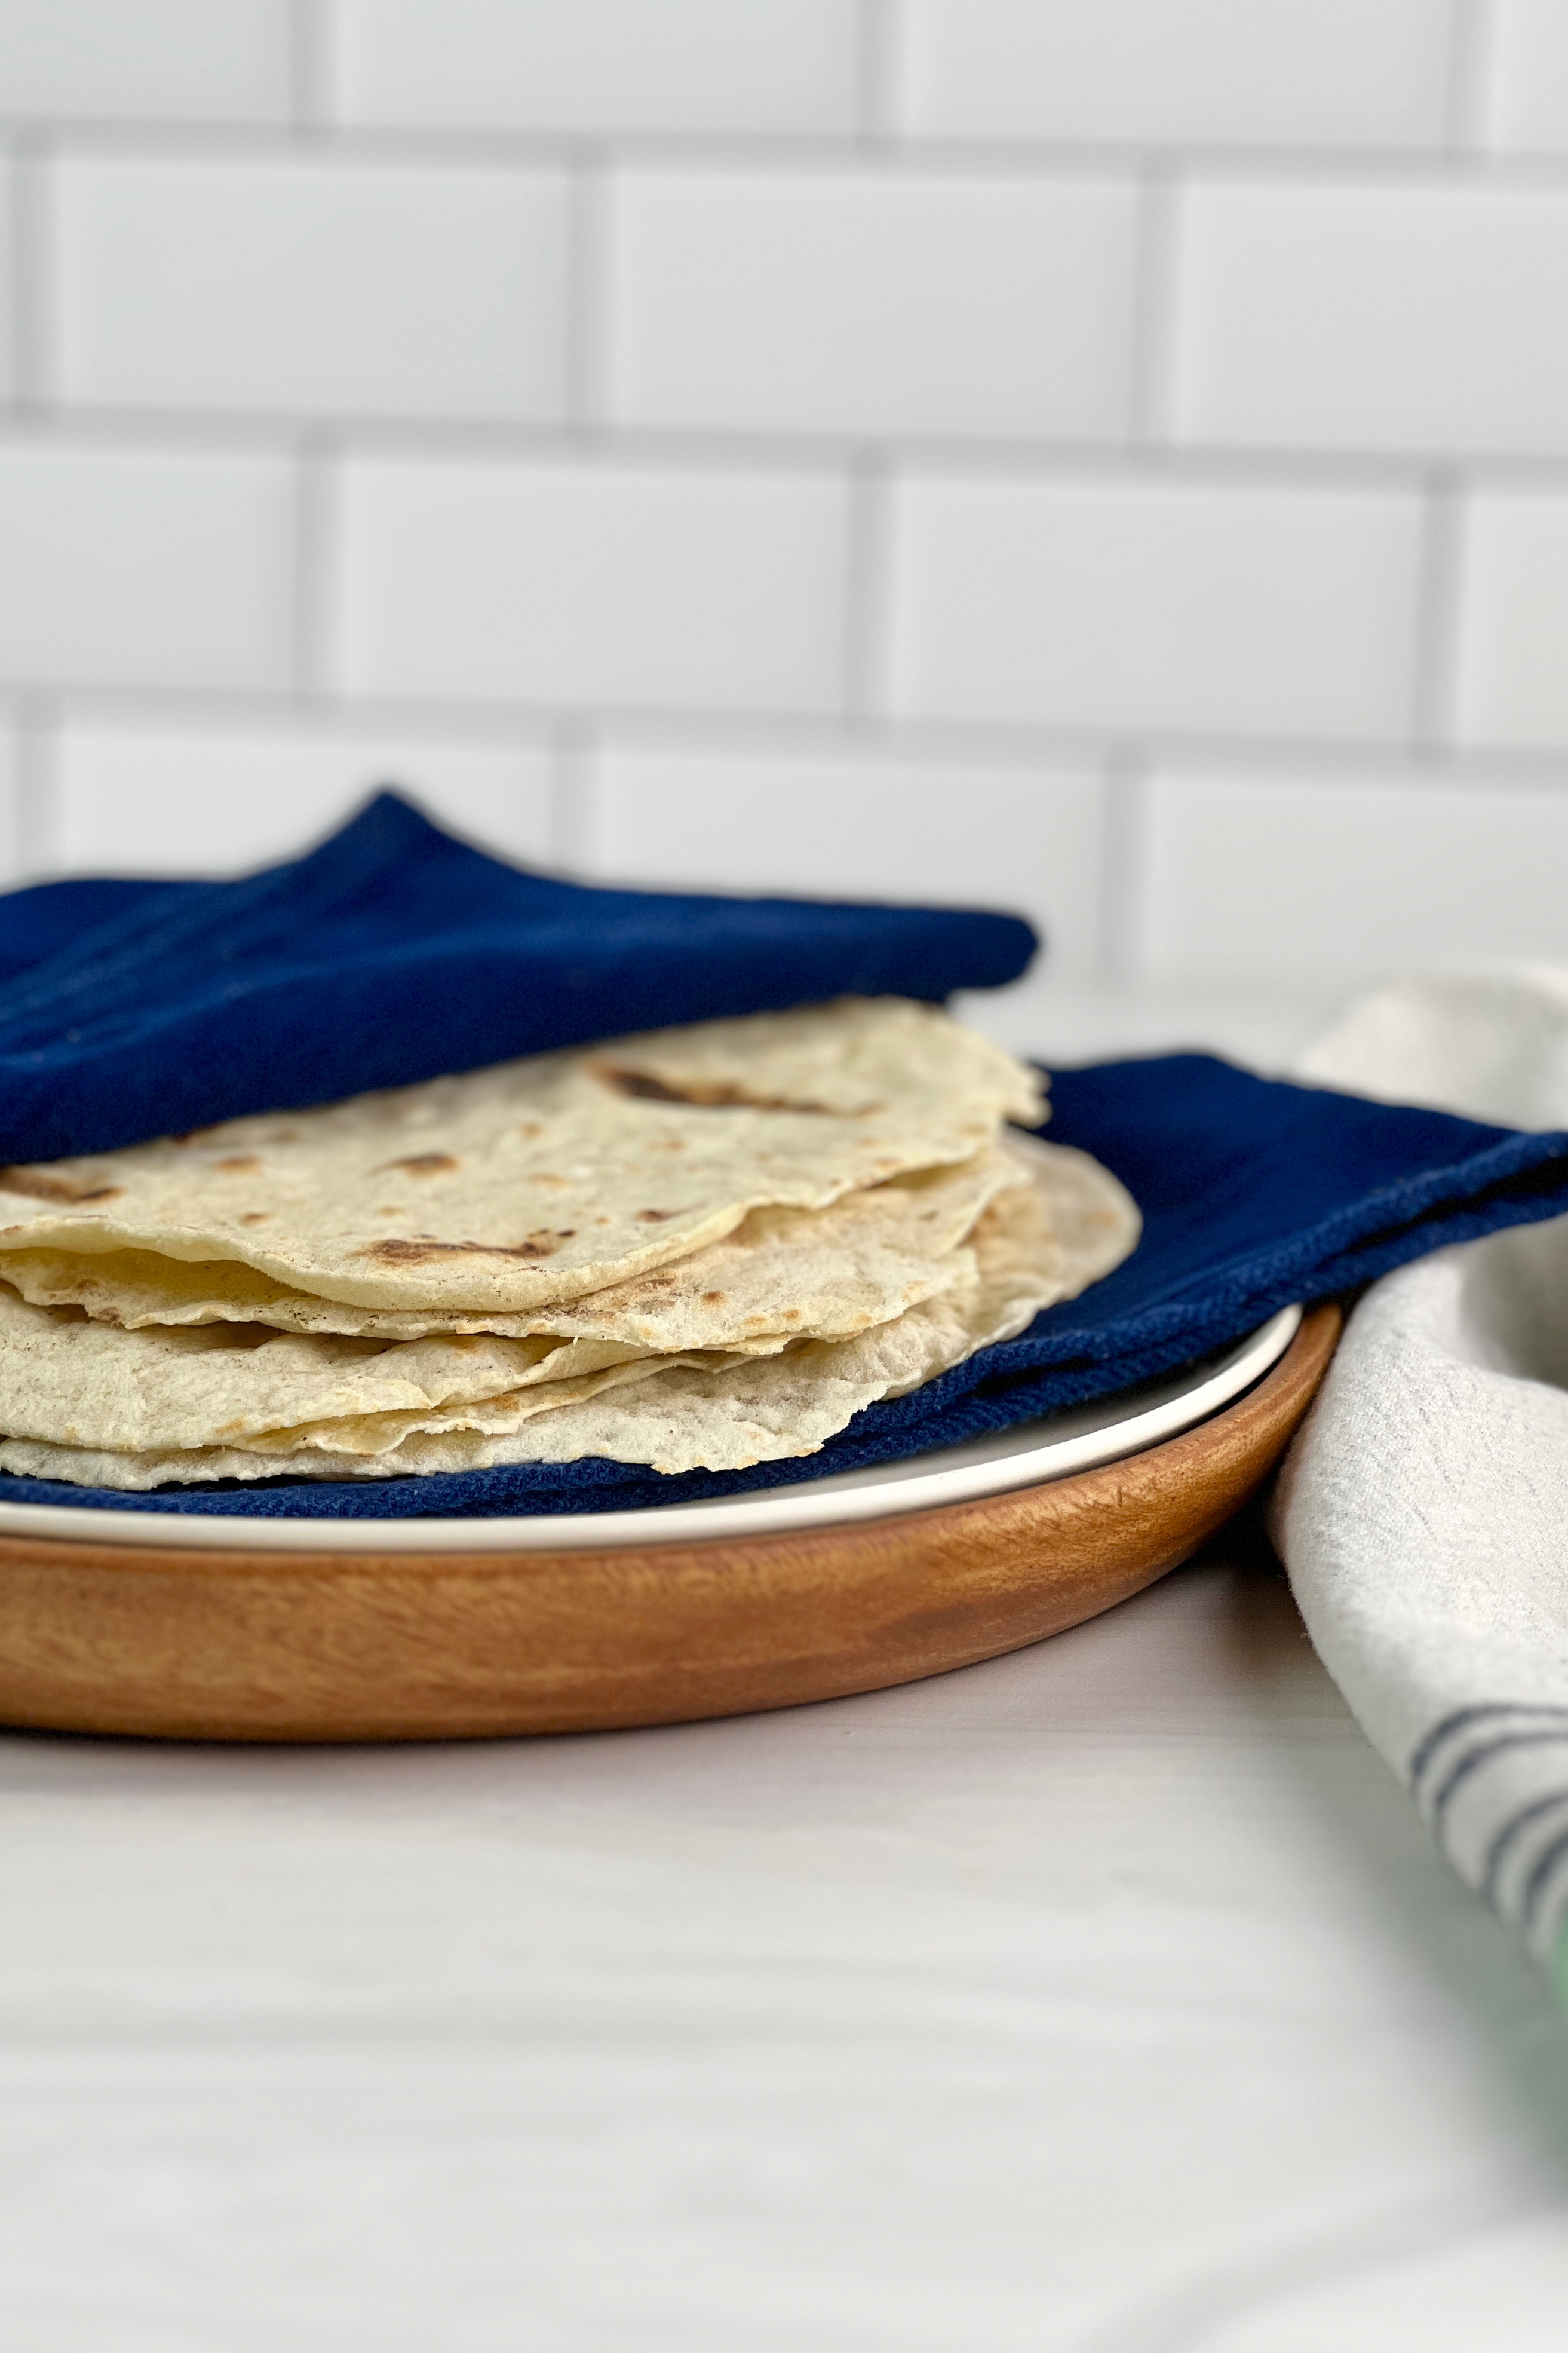 Soft and delicious homemade tortillas that are easy to make with ingredients you have in your pantry right now!